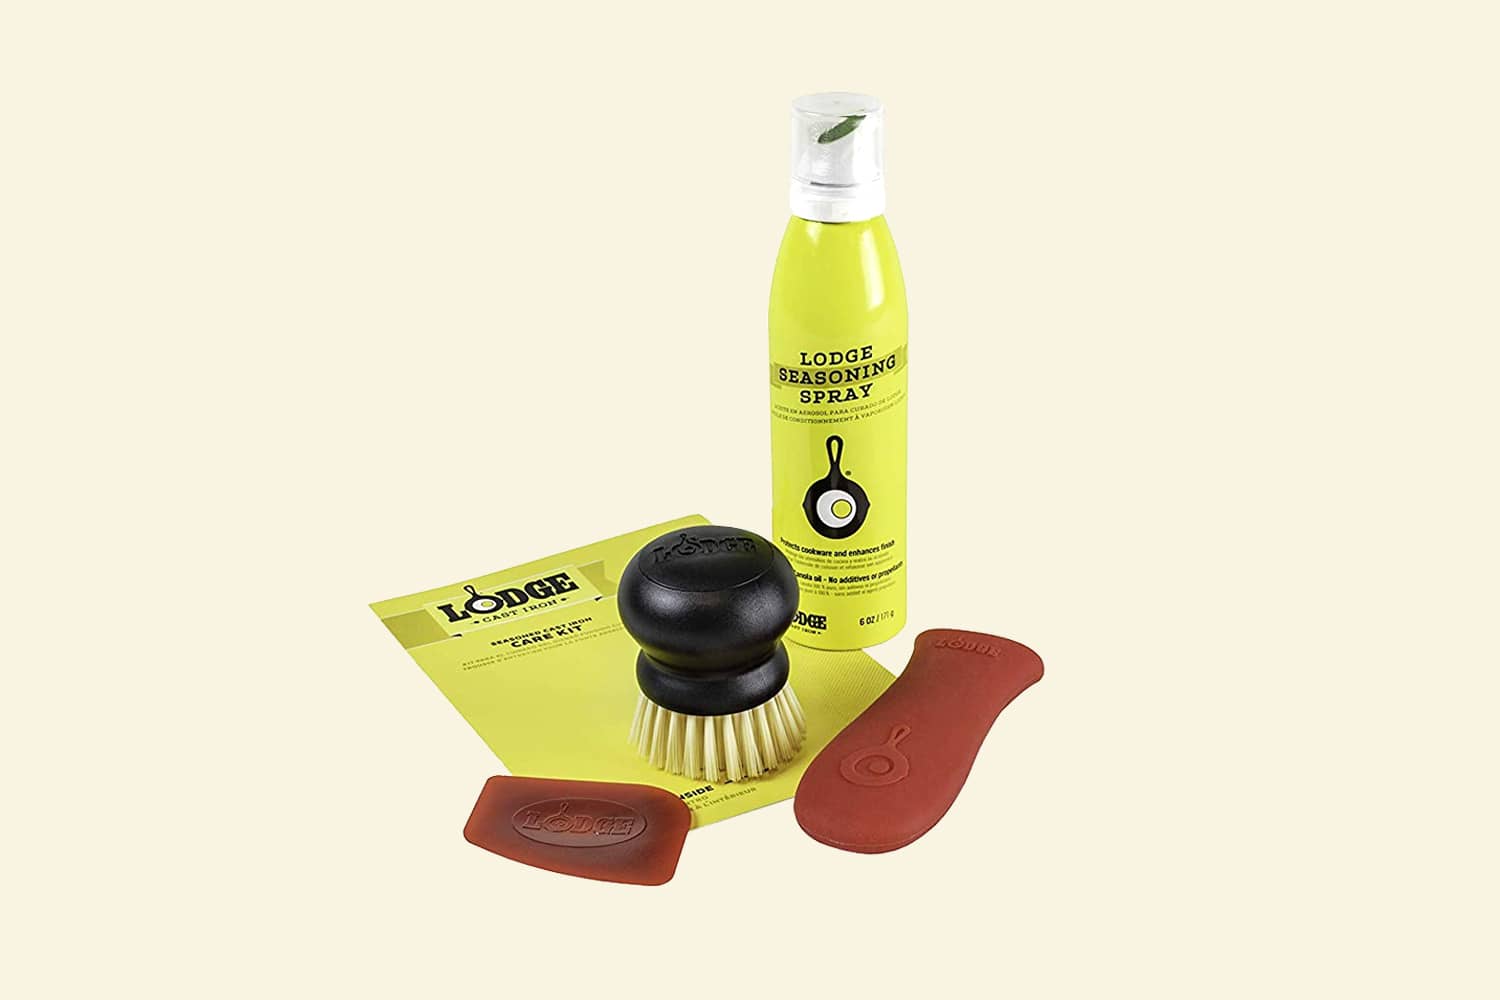  Cast Iron Cleaning Accessories Kit: Natural Wood Cast Iron  Scrubber, Skillet Handle Cover, Pan and Grill Scraper Kit With Gentle But  Tough Cast Iron Scrub Brush – Keep Your Cast Iron